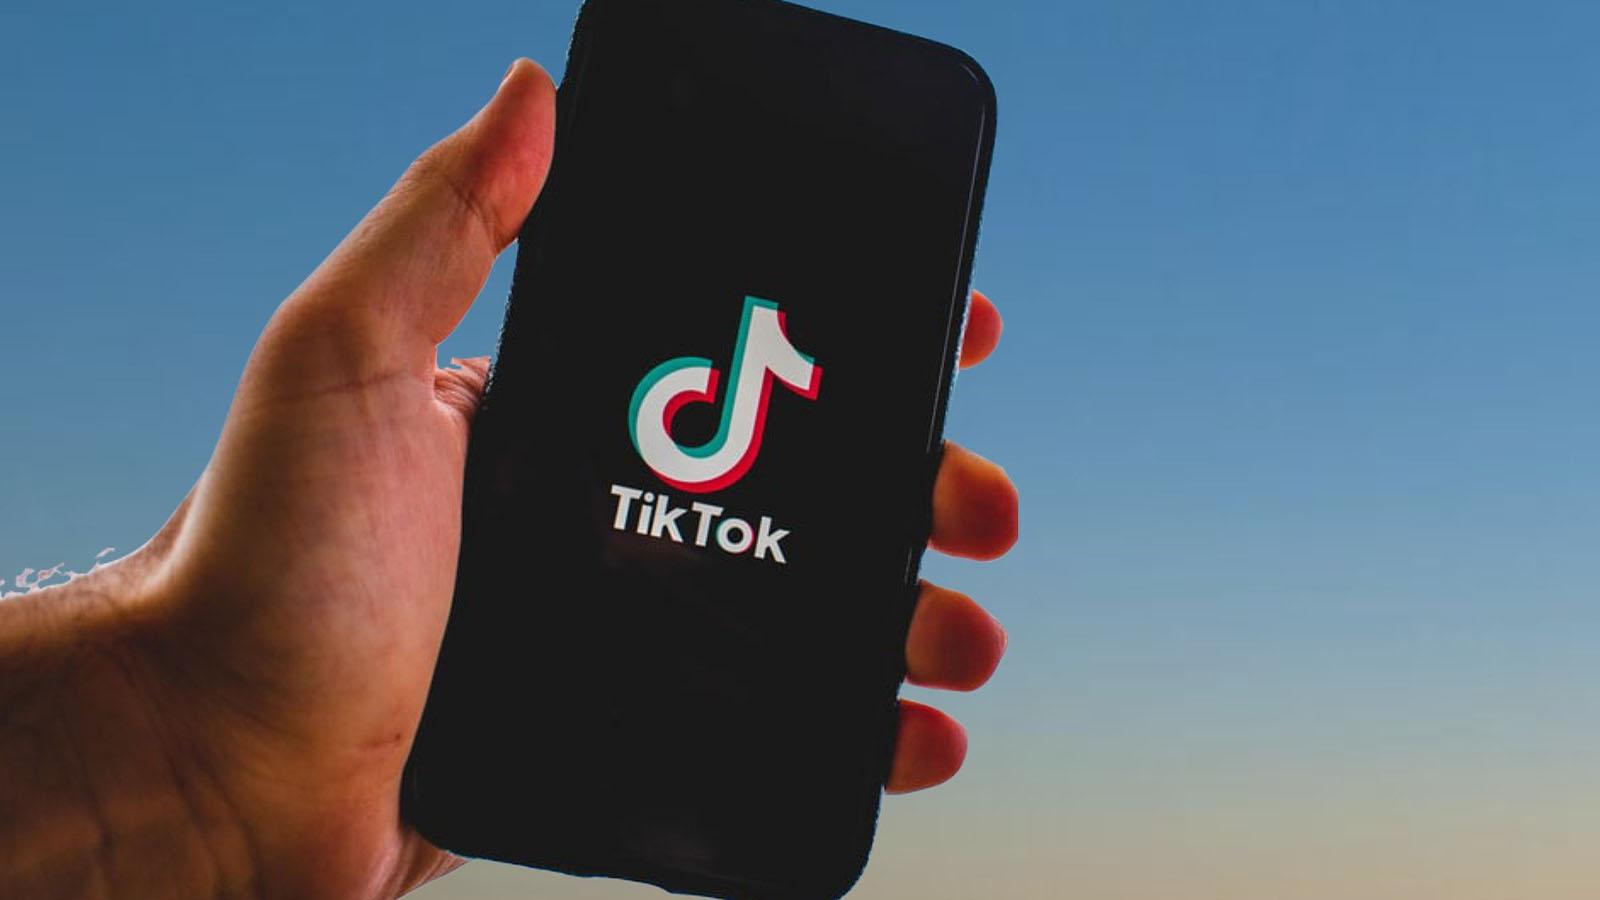 TikTok launch screen on phone in front of sky